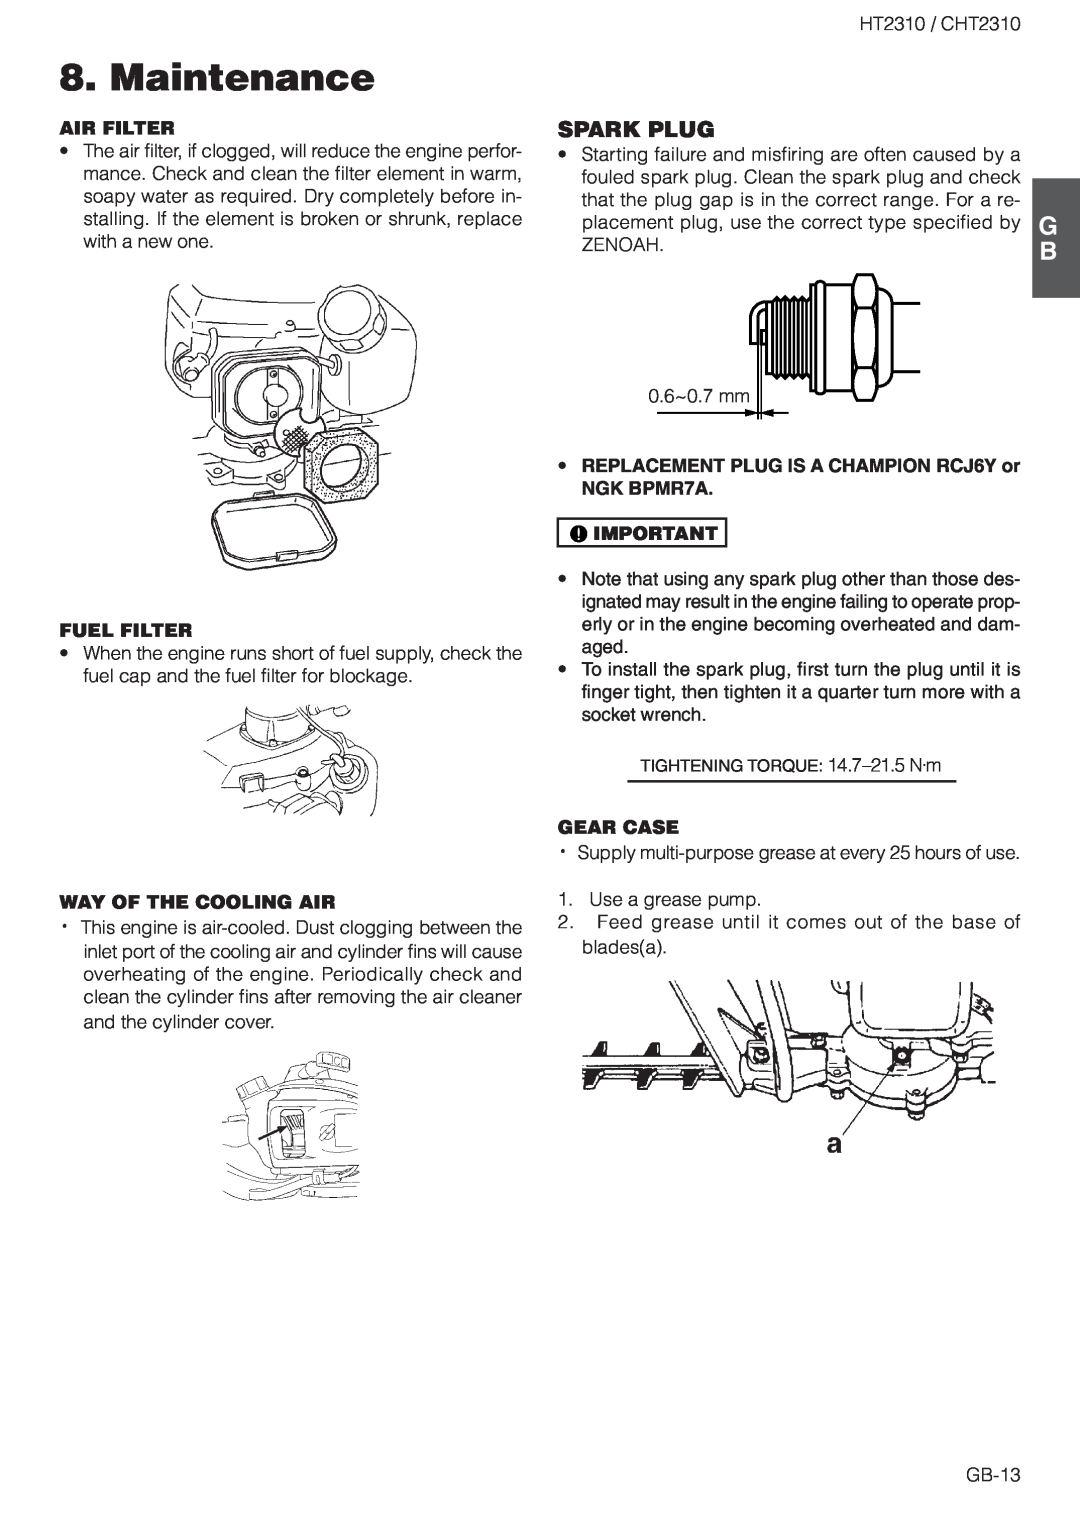 Zenoah CHT2310 owner manual Spark Plug, Air Filter, Fuel Filter, Way Of The Cooling Air, Gear Case, Maintenance 